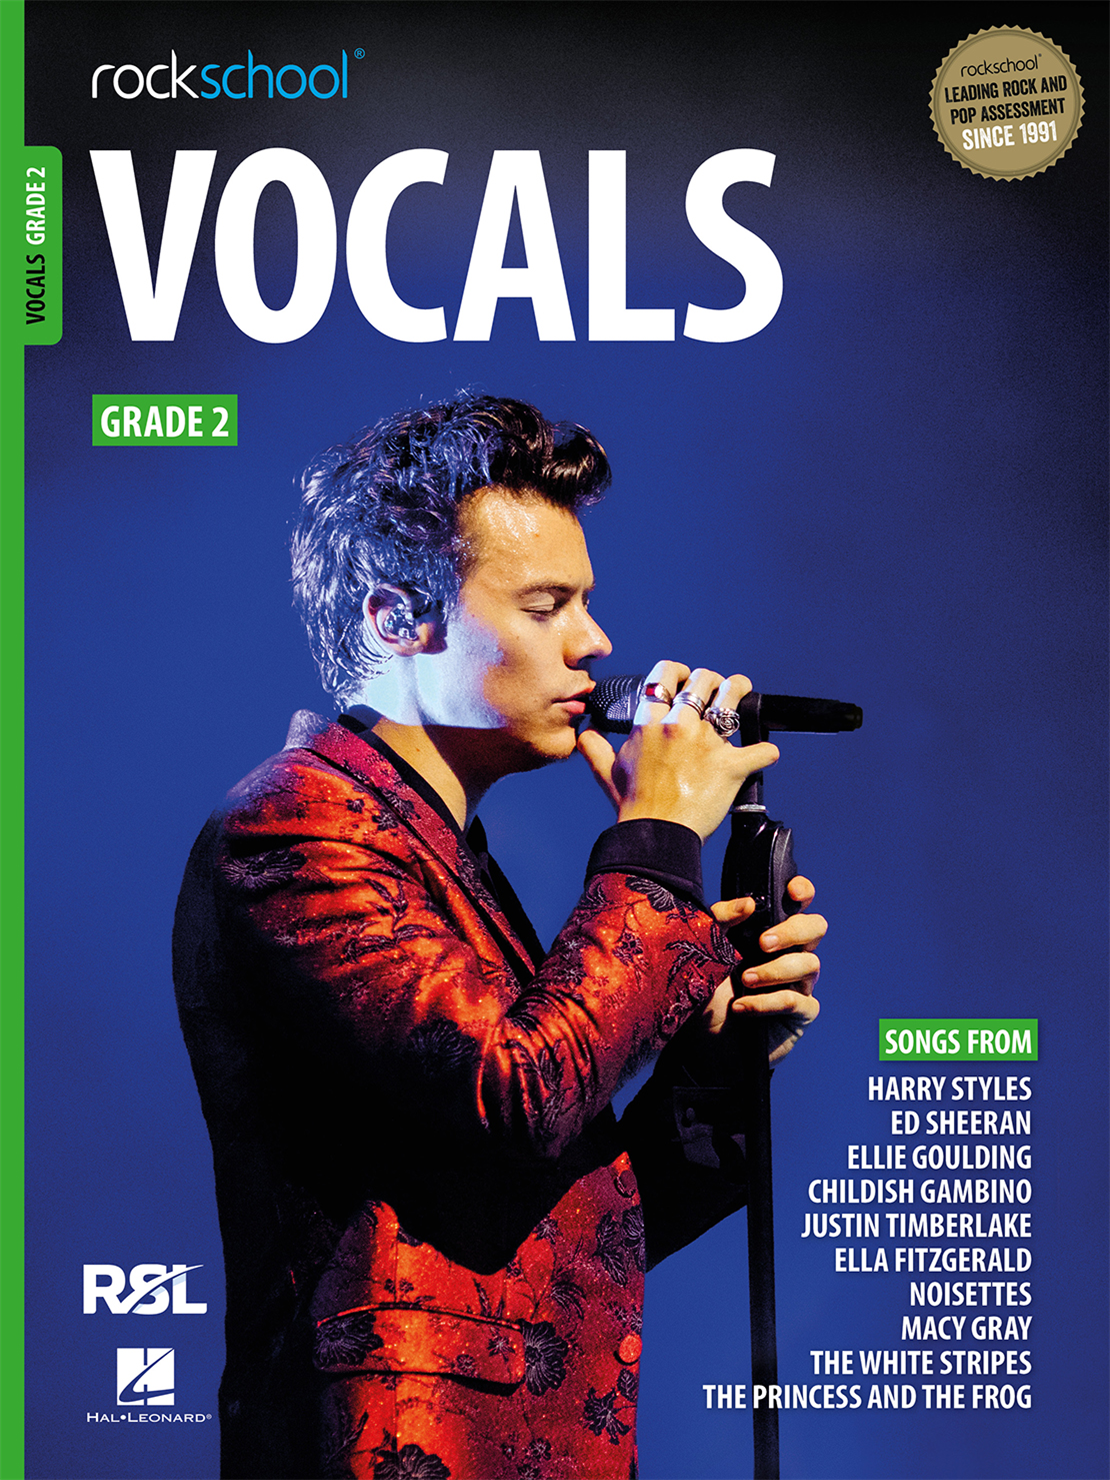 Rockschool Vocals Male Singers Grade 2 Music Book with Audio Access 